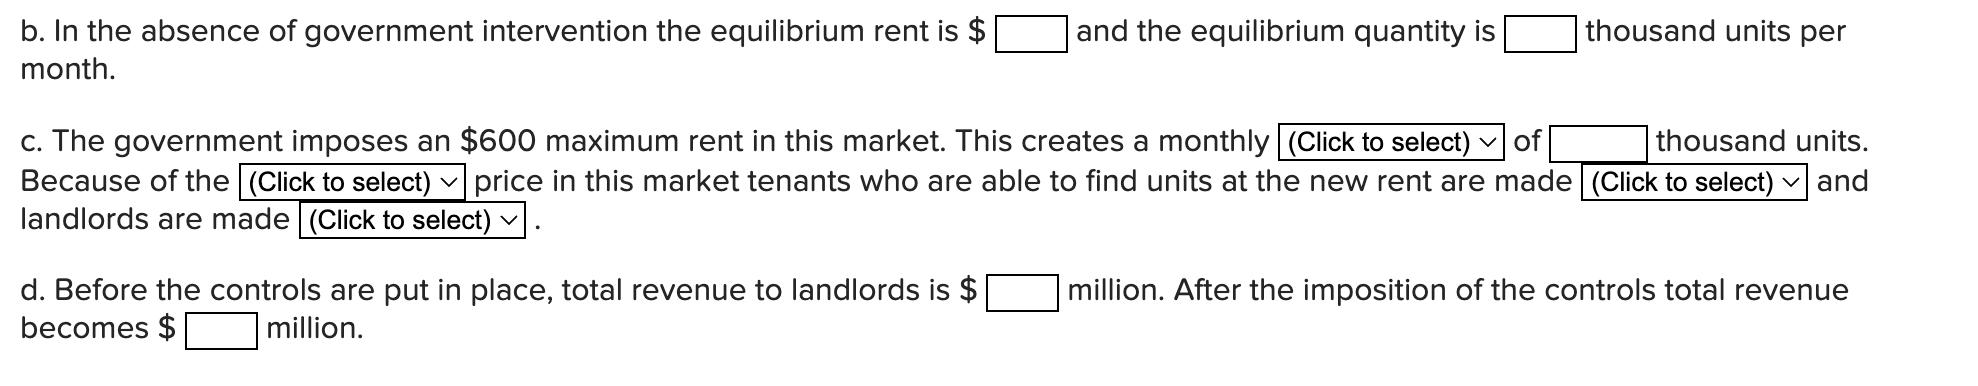 b. In the absence of government intervention the equilibrium rent is $ month. and the equilibrium quantity is